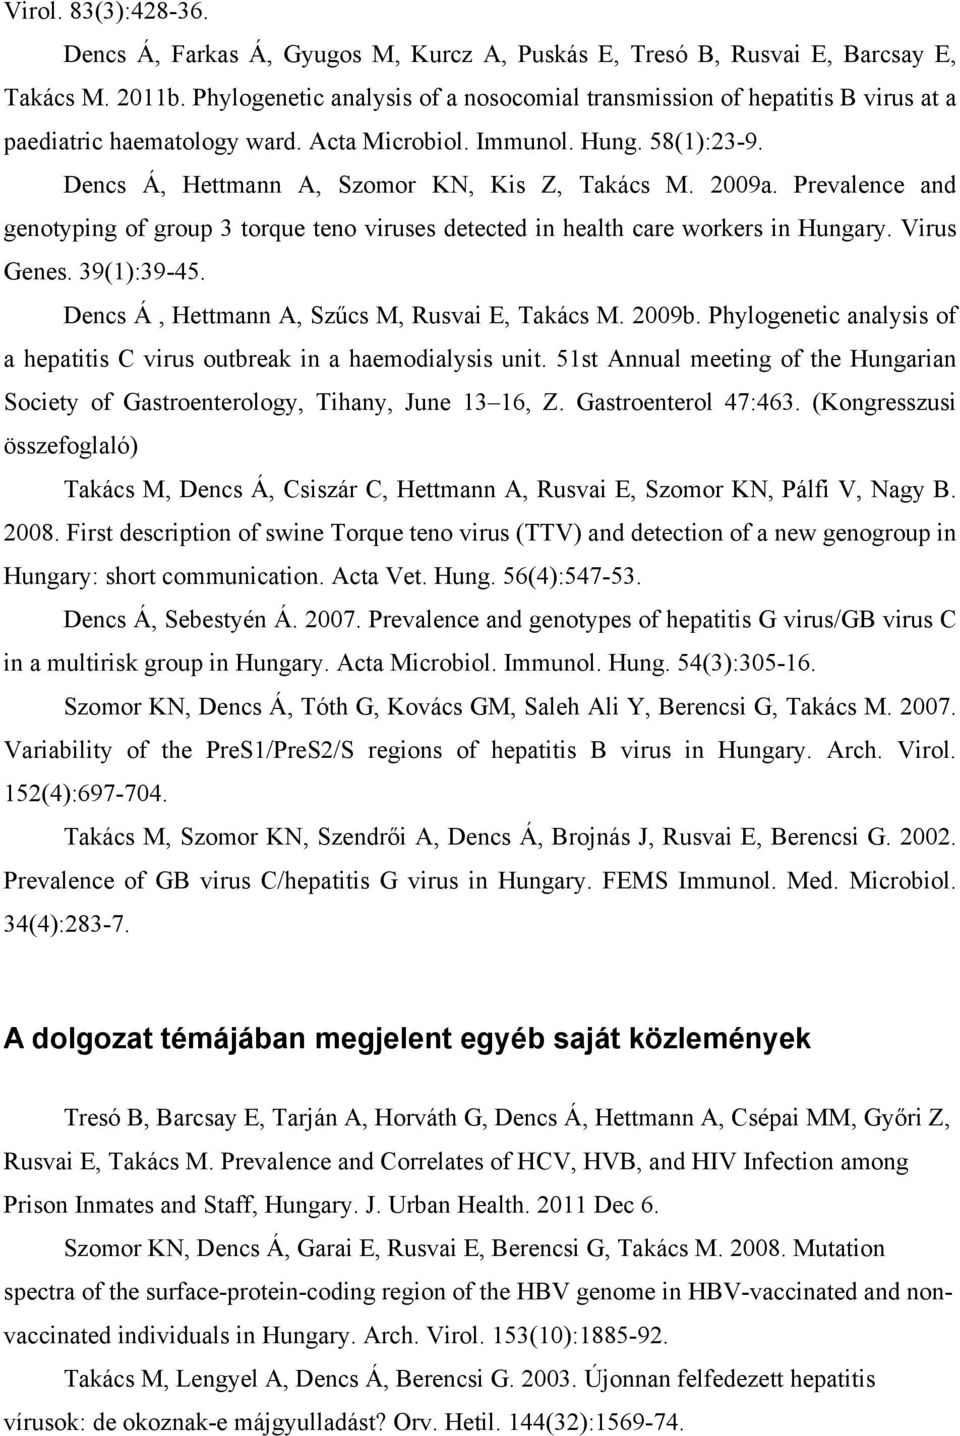 2009a. Prevalence and genotyping of group 3 torque teno viruses detected in health care workers in Hungary. Virus Genes. 39(1):39-45. Dencs Á, Hettmann A, Szűcs M, Rusvai E, Takács M. 2009b.